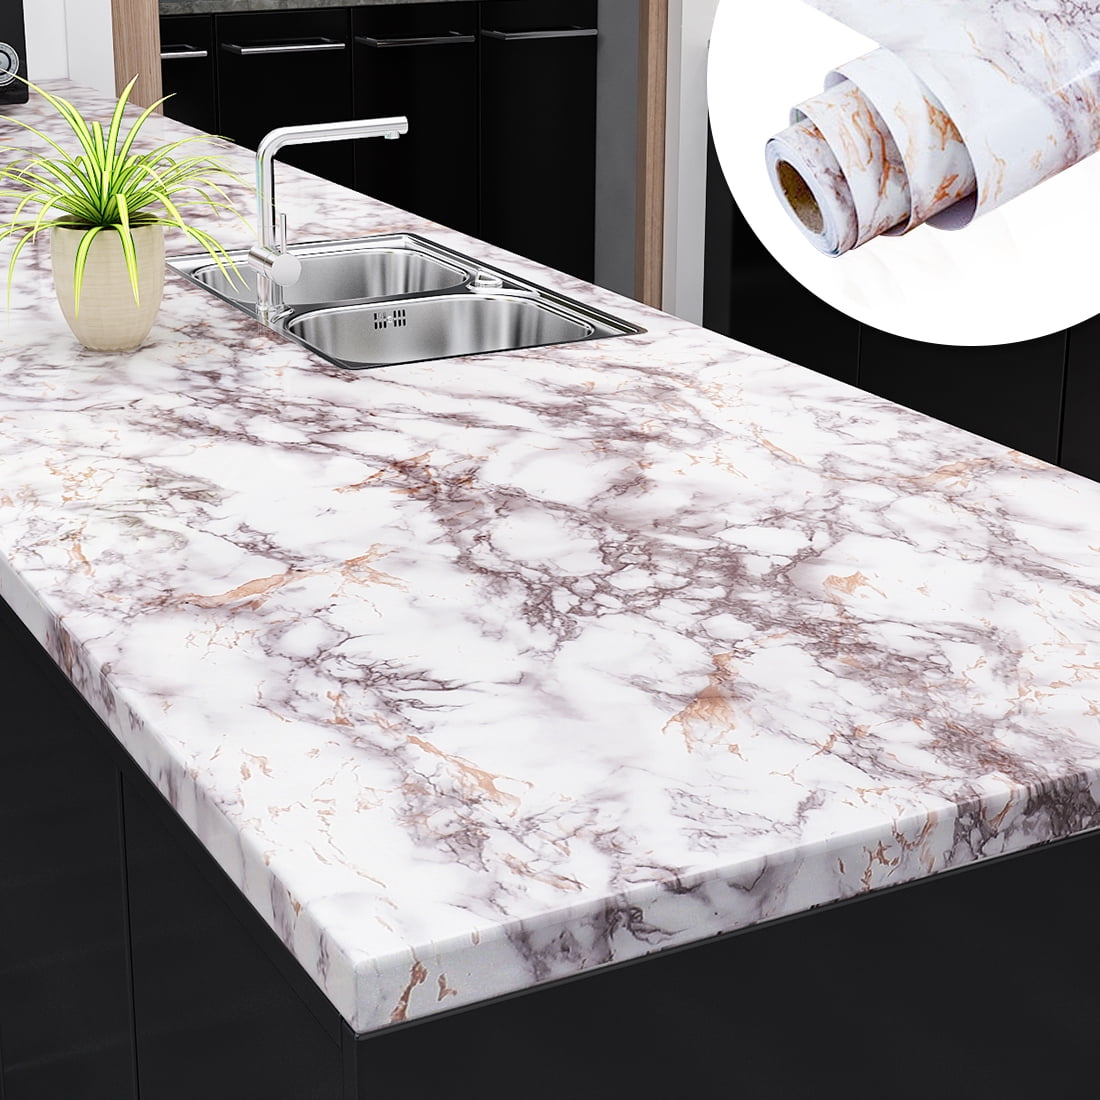 Yenhome Black Brown Marble Countertop Contact Paper 200x30 inch 